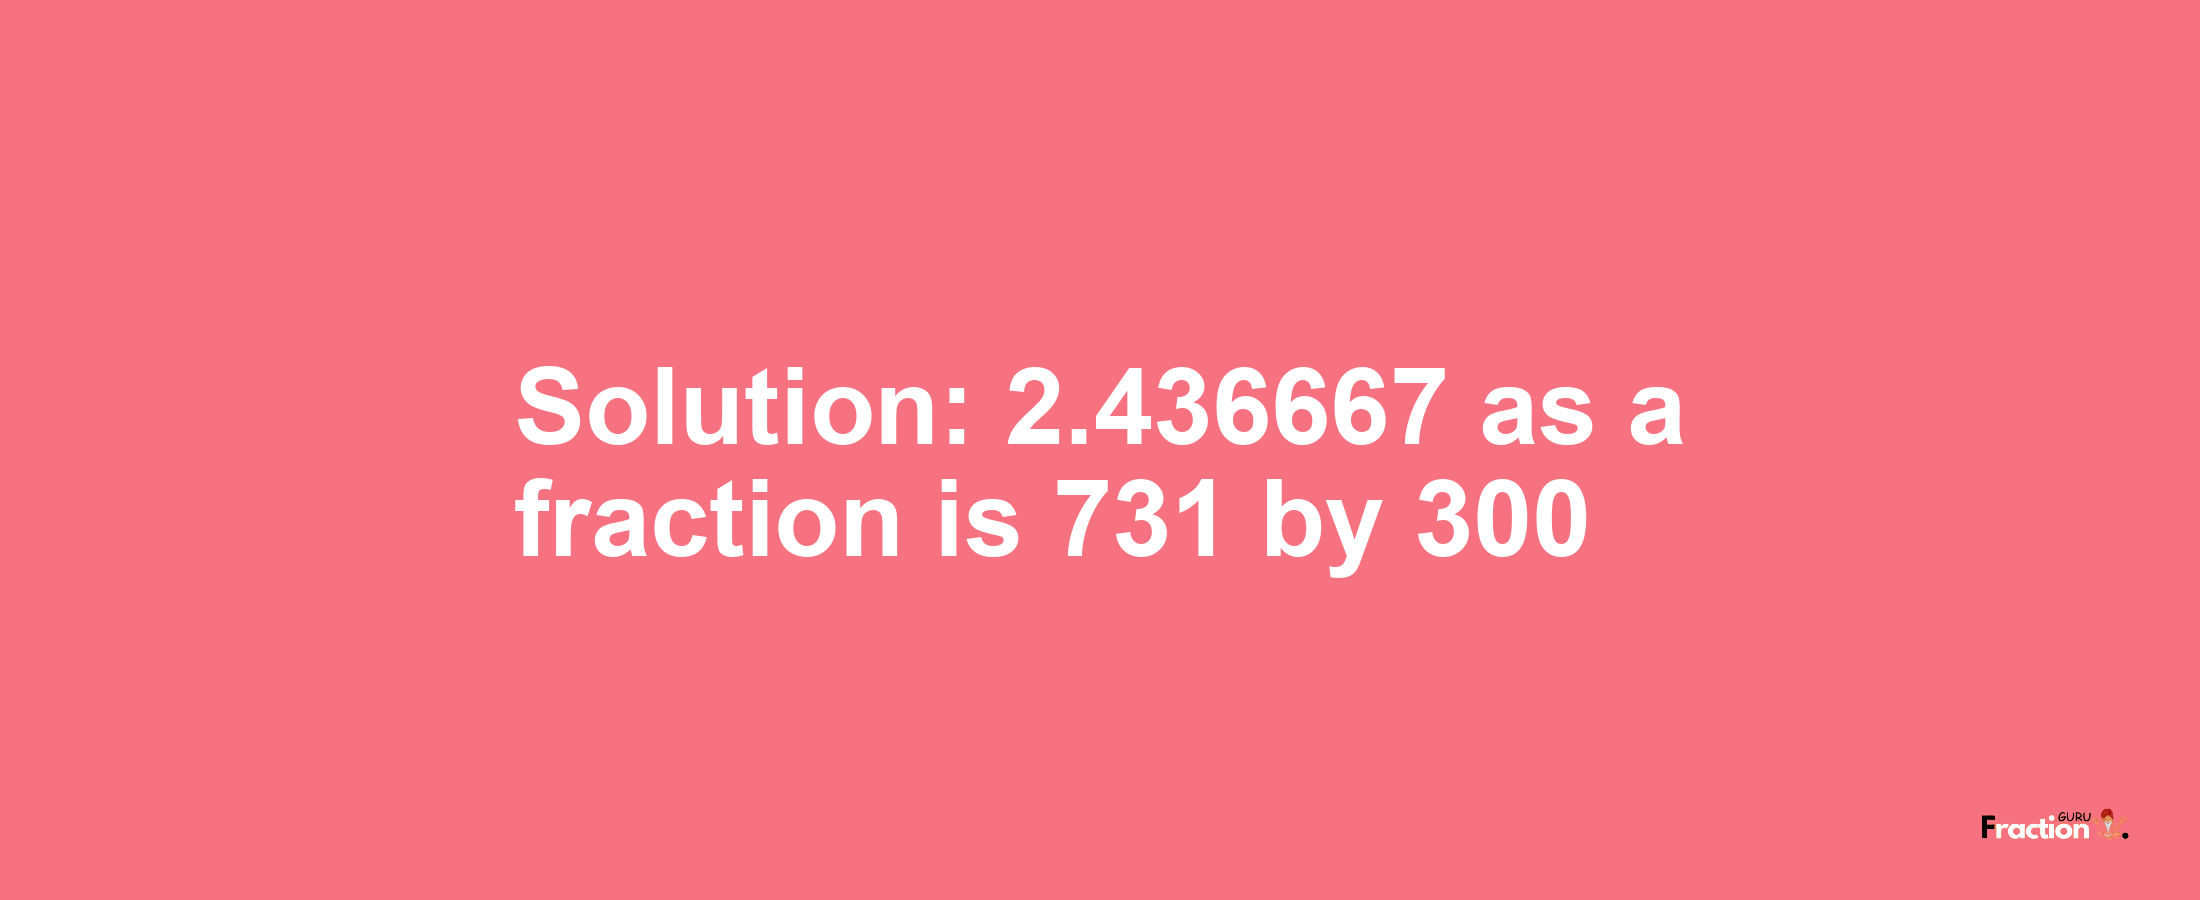 Solution:2.436667 as a fraction is 731/300